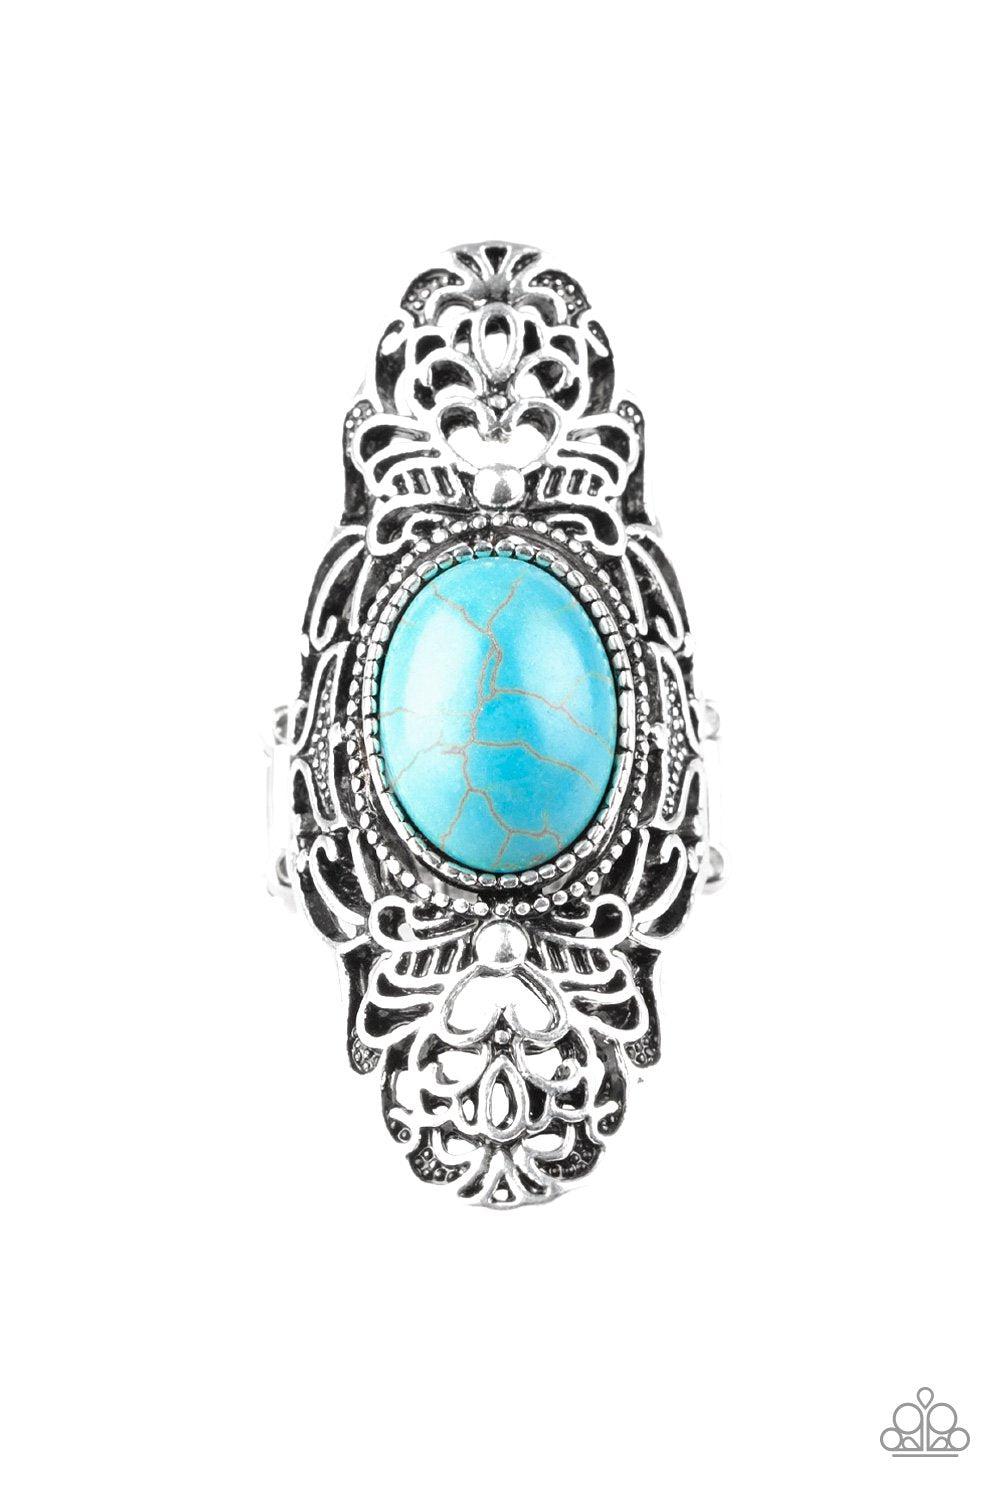 Ego Trippin' Turquoise Blue Stone and Silver Ring - Paparazzi Accessories- lightbox - CarasShop.com - $5 Jewelry by Cara Jewels